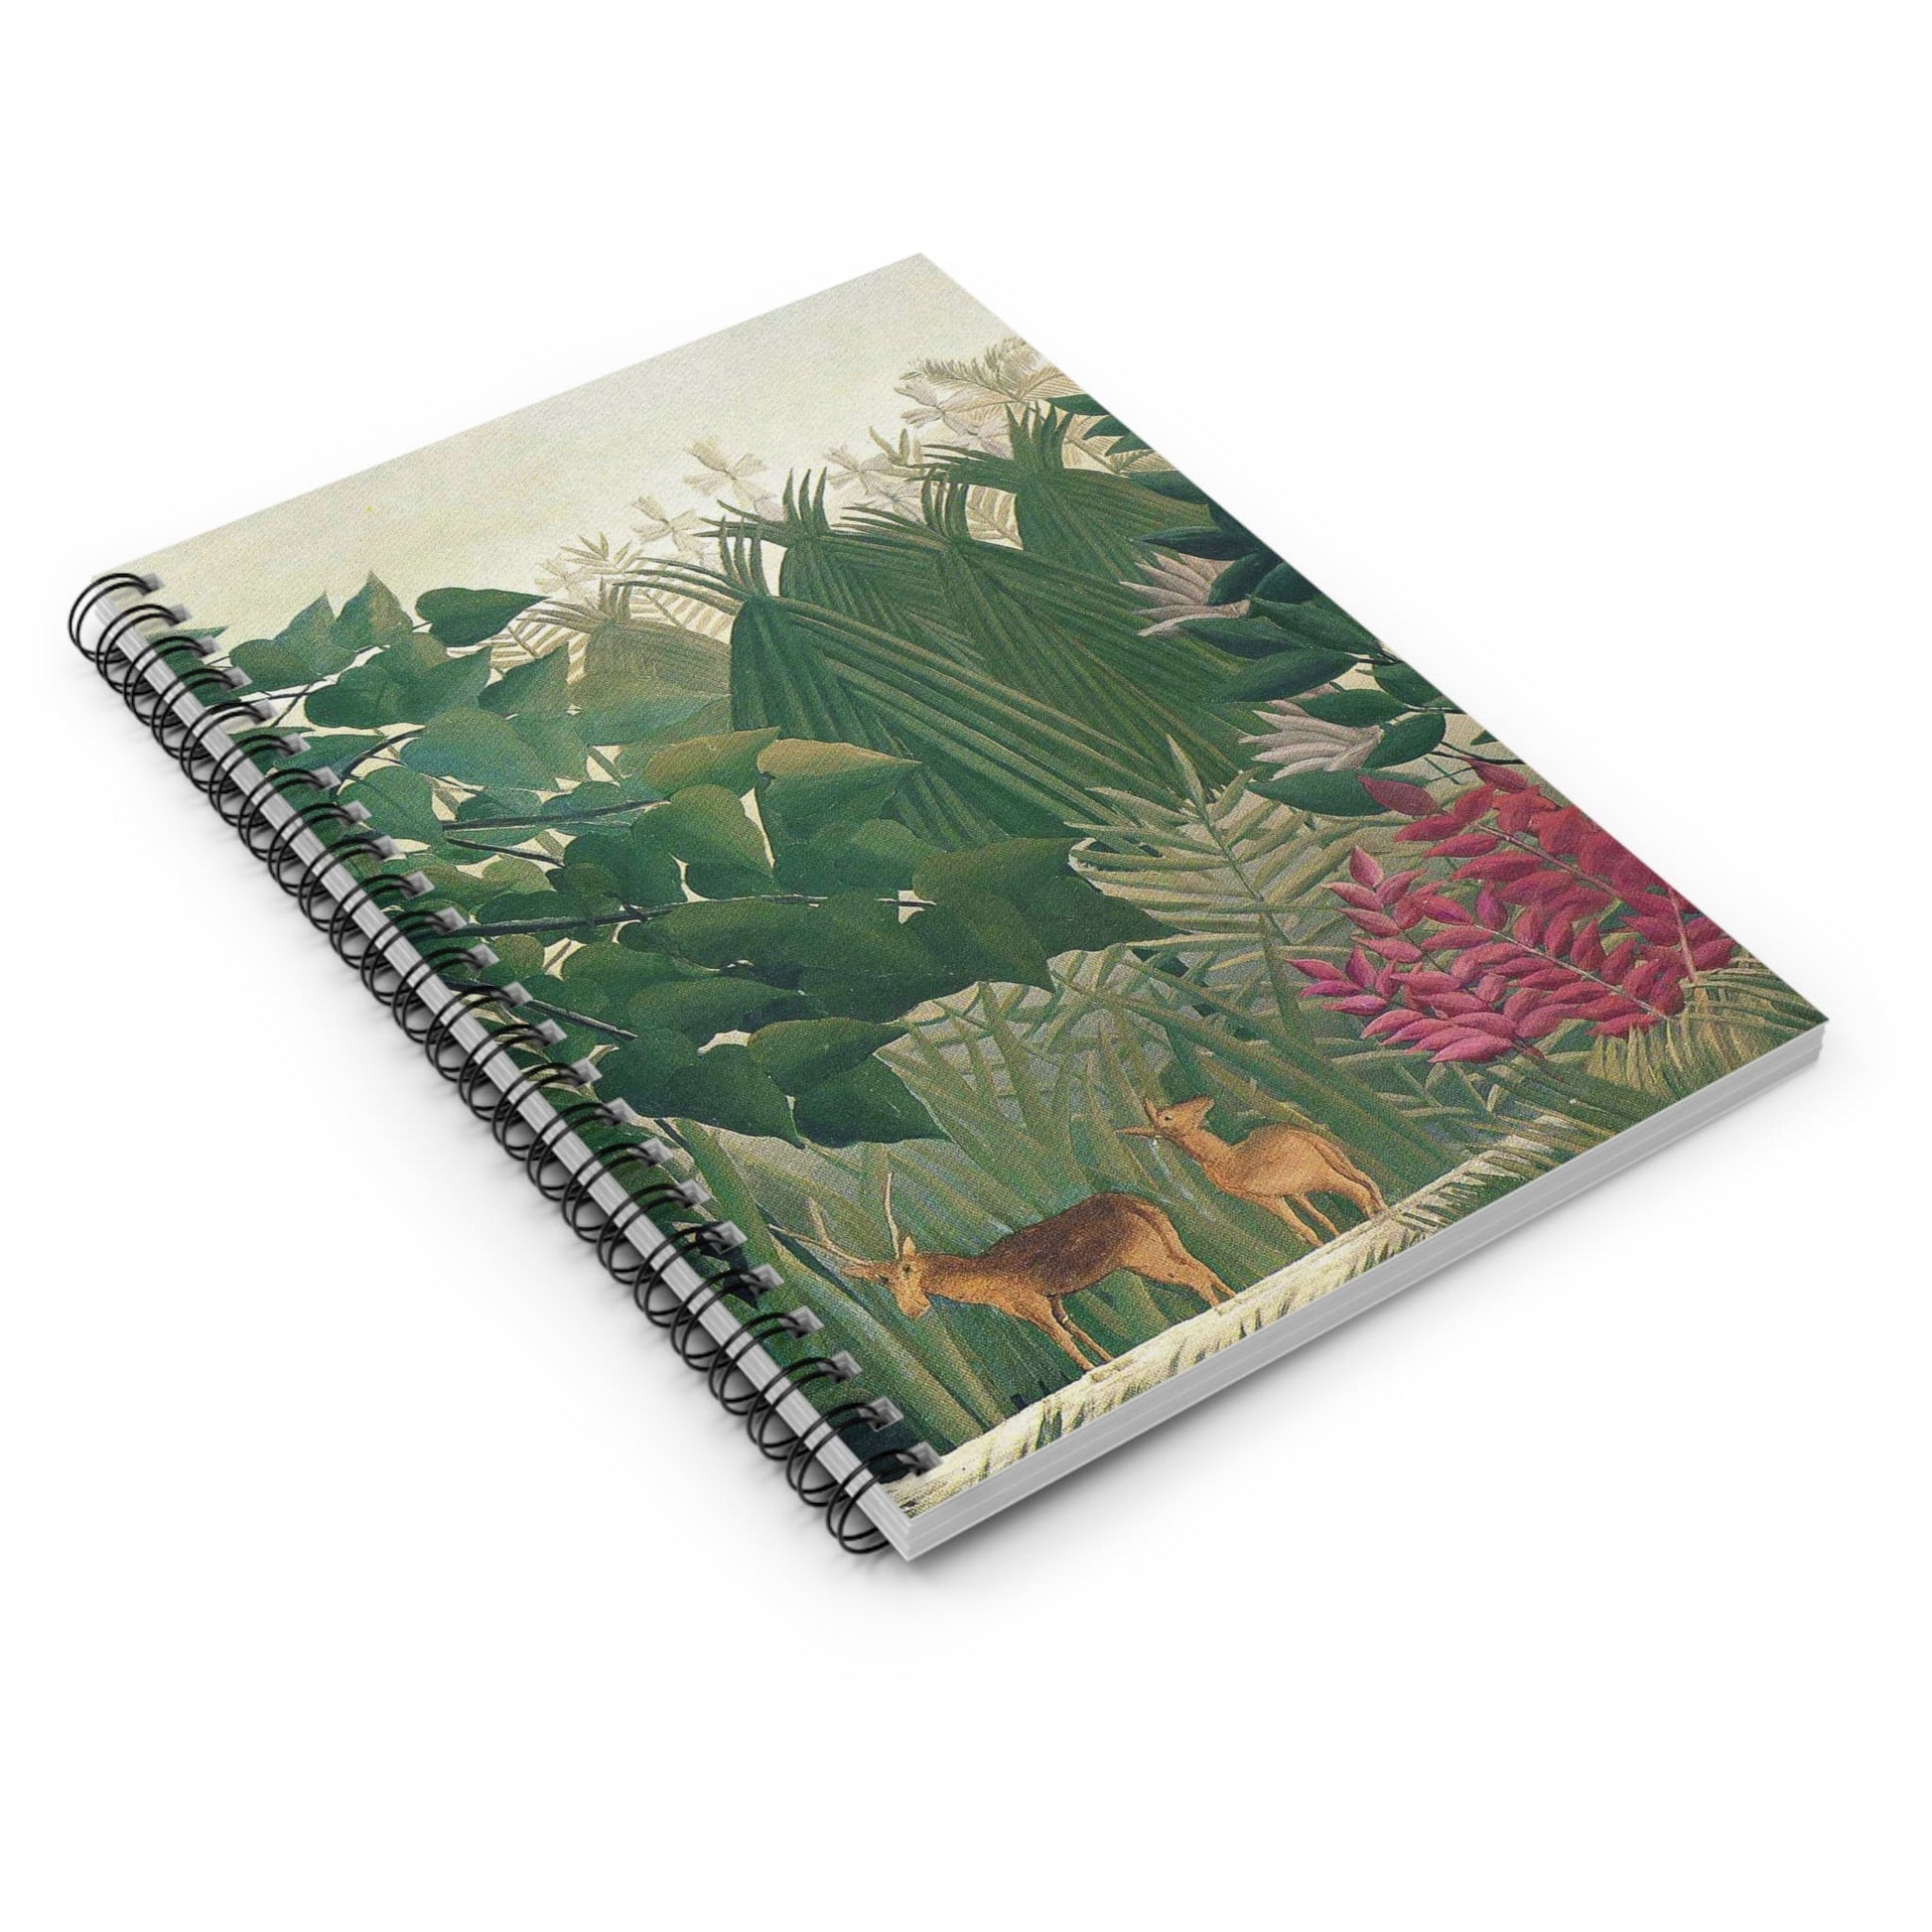 Jungle Spiral Notebook Laying Flat on White Surface